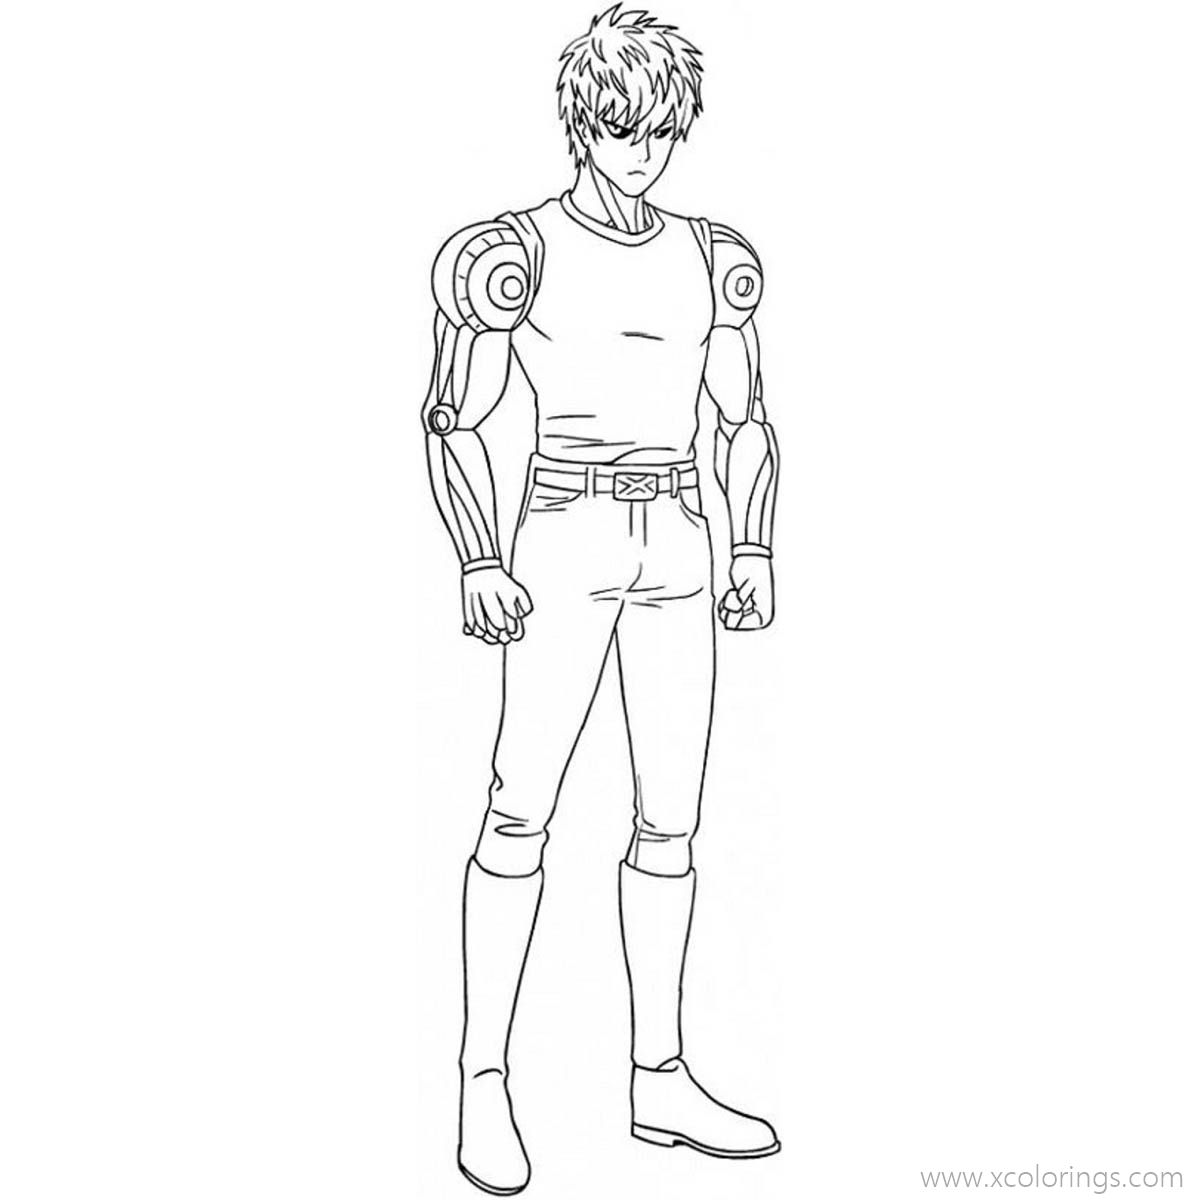 Free One Punch Man Coloring Pages Genos the Demon Cyborg printable